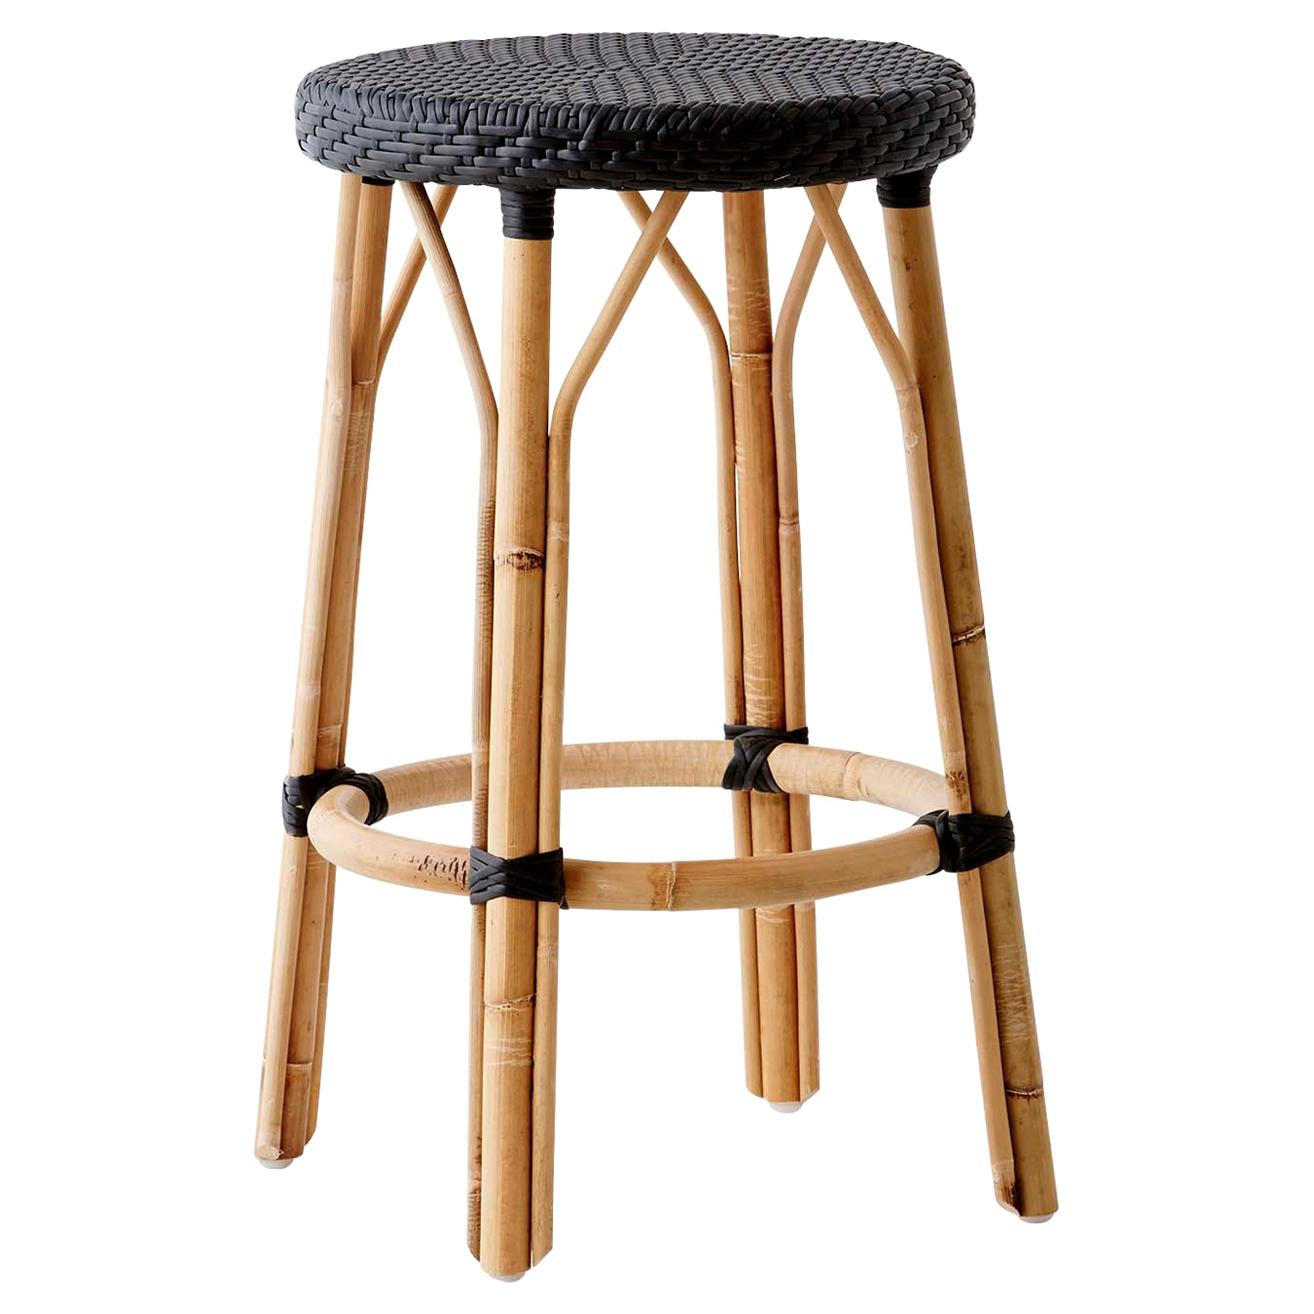 Sika Design Simone Woven Rattan Bistro Counter Stool in Black with Black Dots